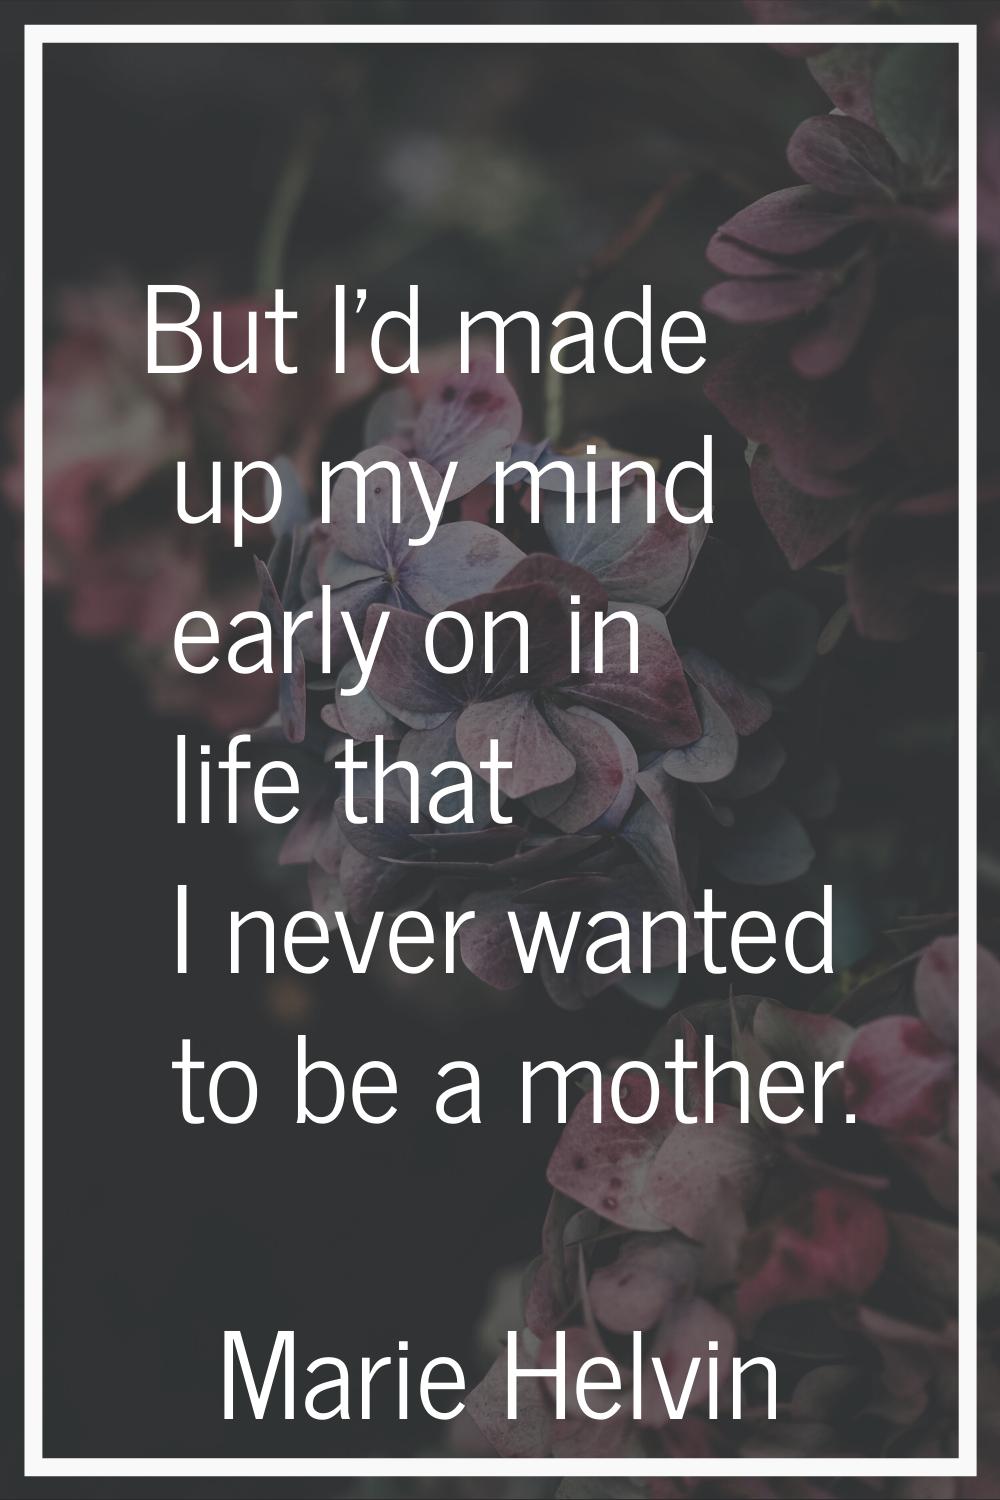 But I'd made up my mind early on in life that I never wanted to be a mother.